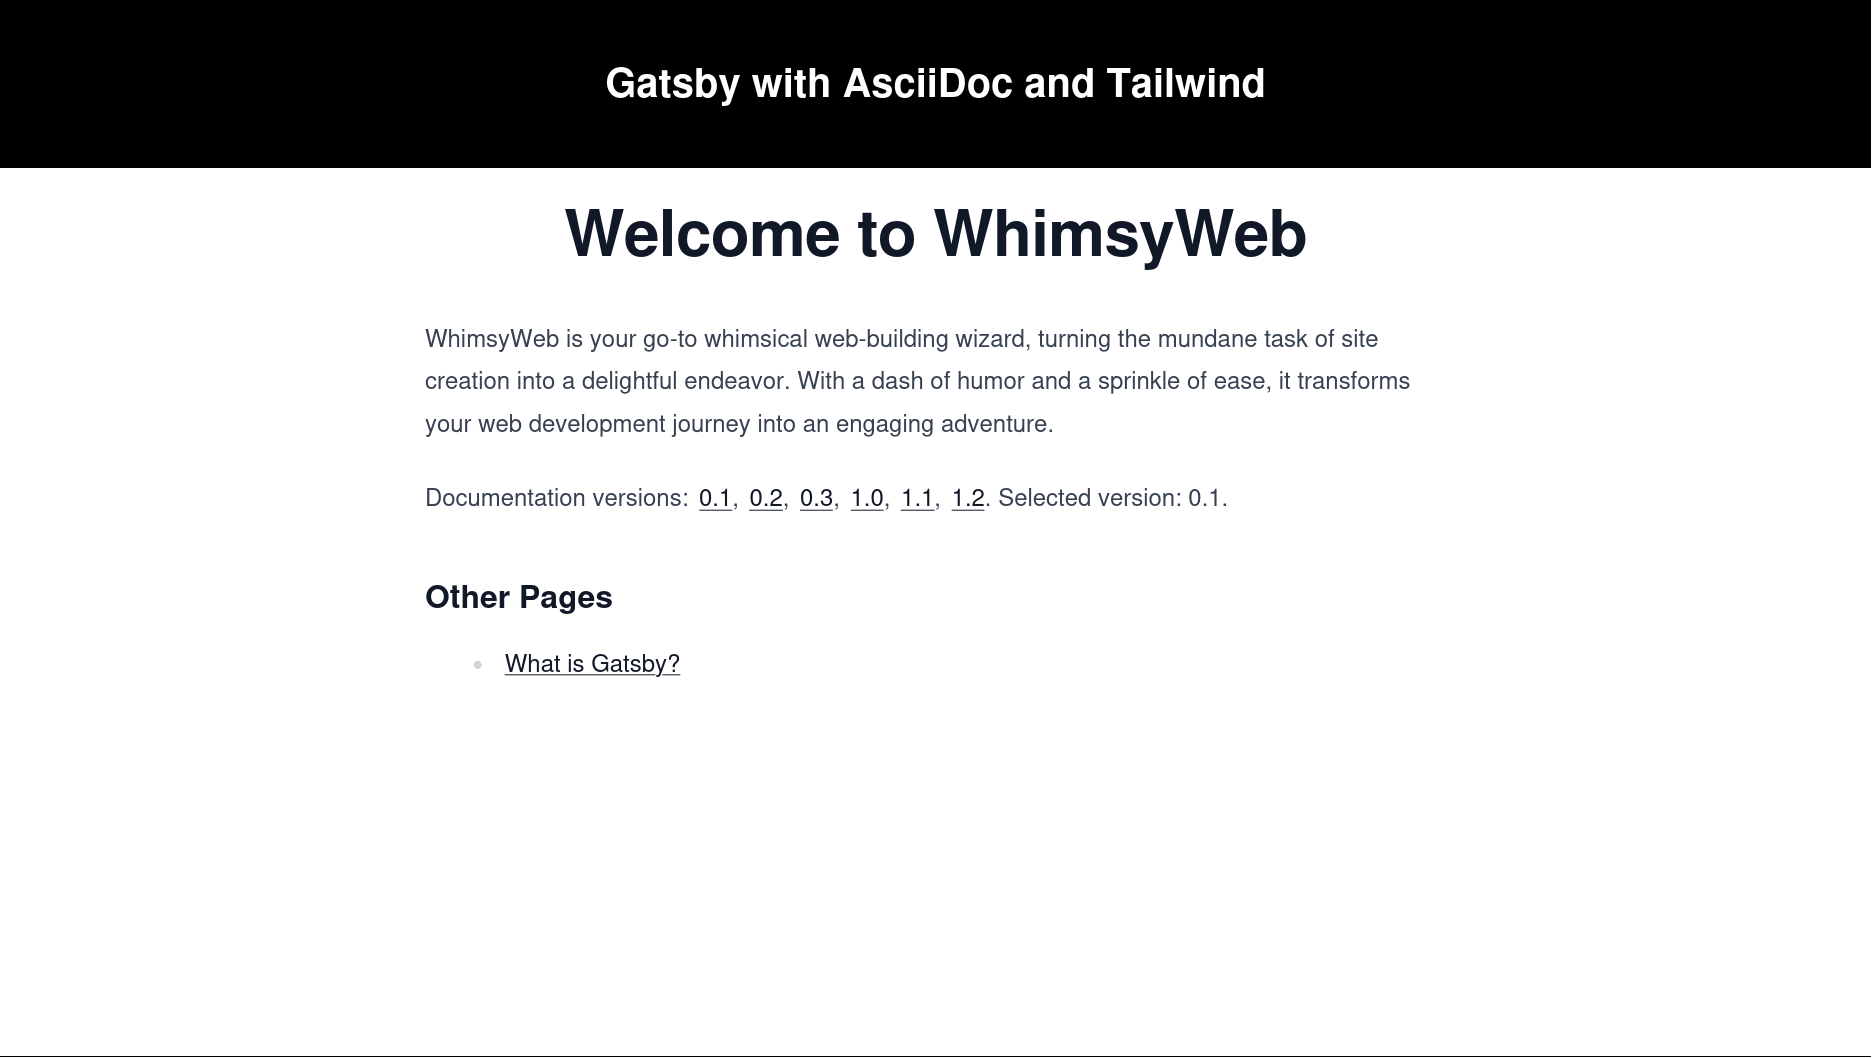 WhimsyWeb landing page for version 0.1.